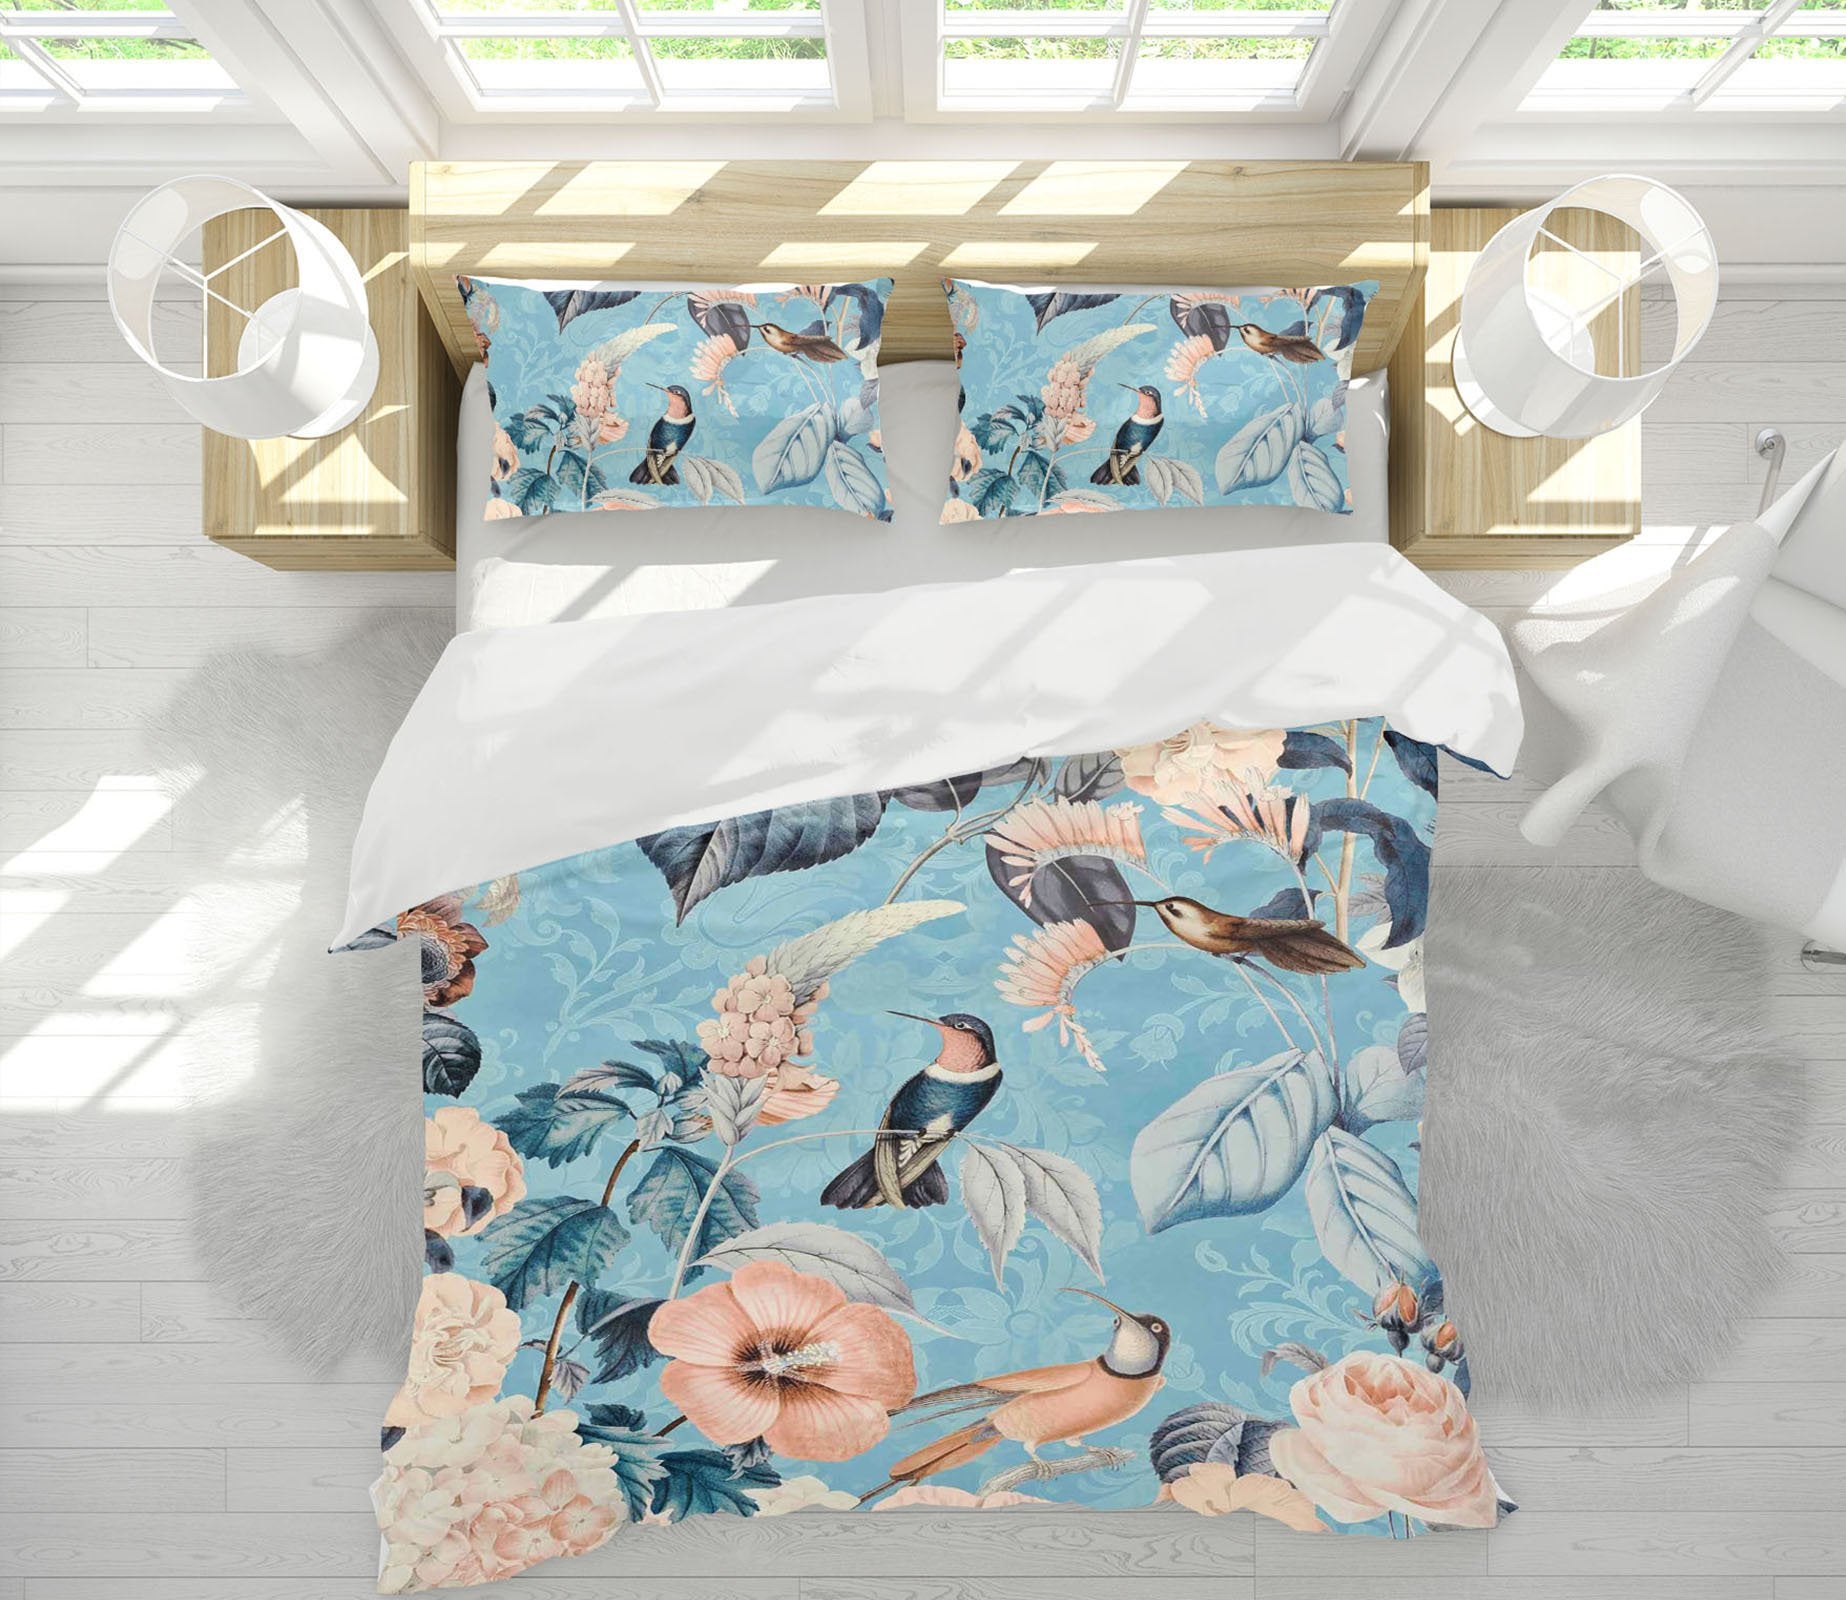 3D Bird Flowers 2122 Andrea haase Bedding Bed Pillowcases Quilt Quiet Covers AJ Creativity Home 